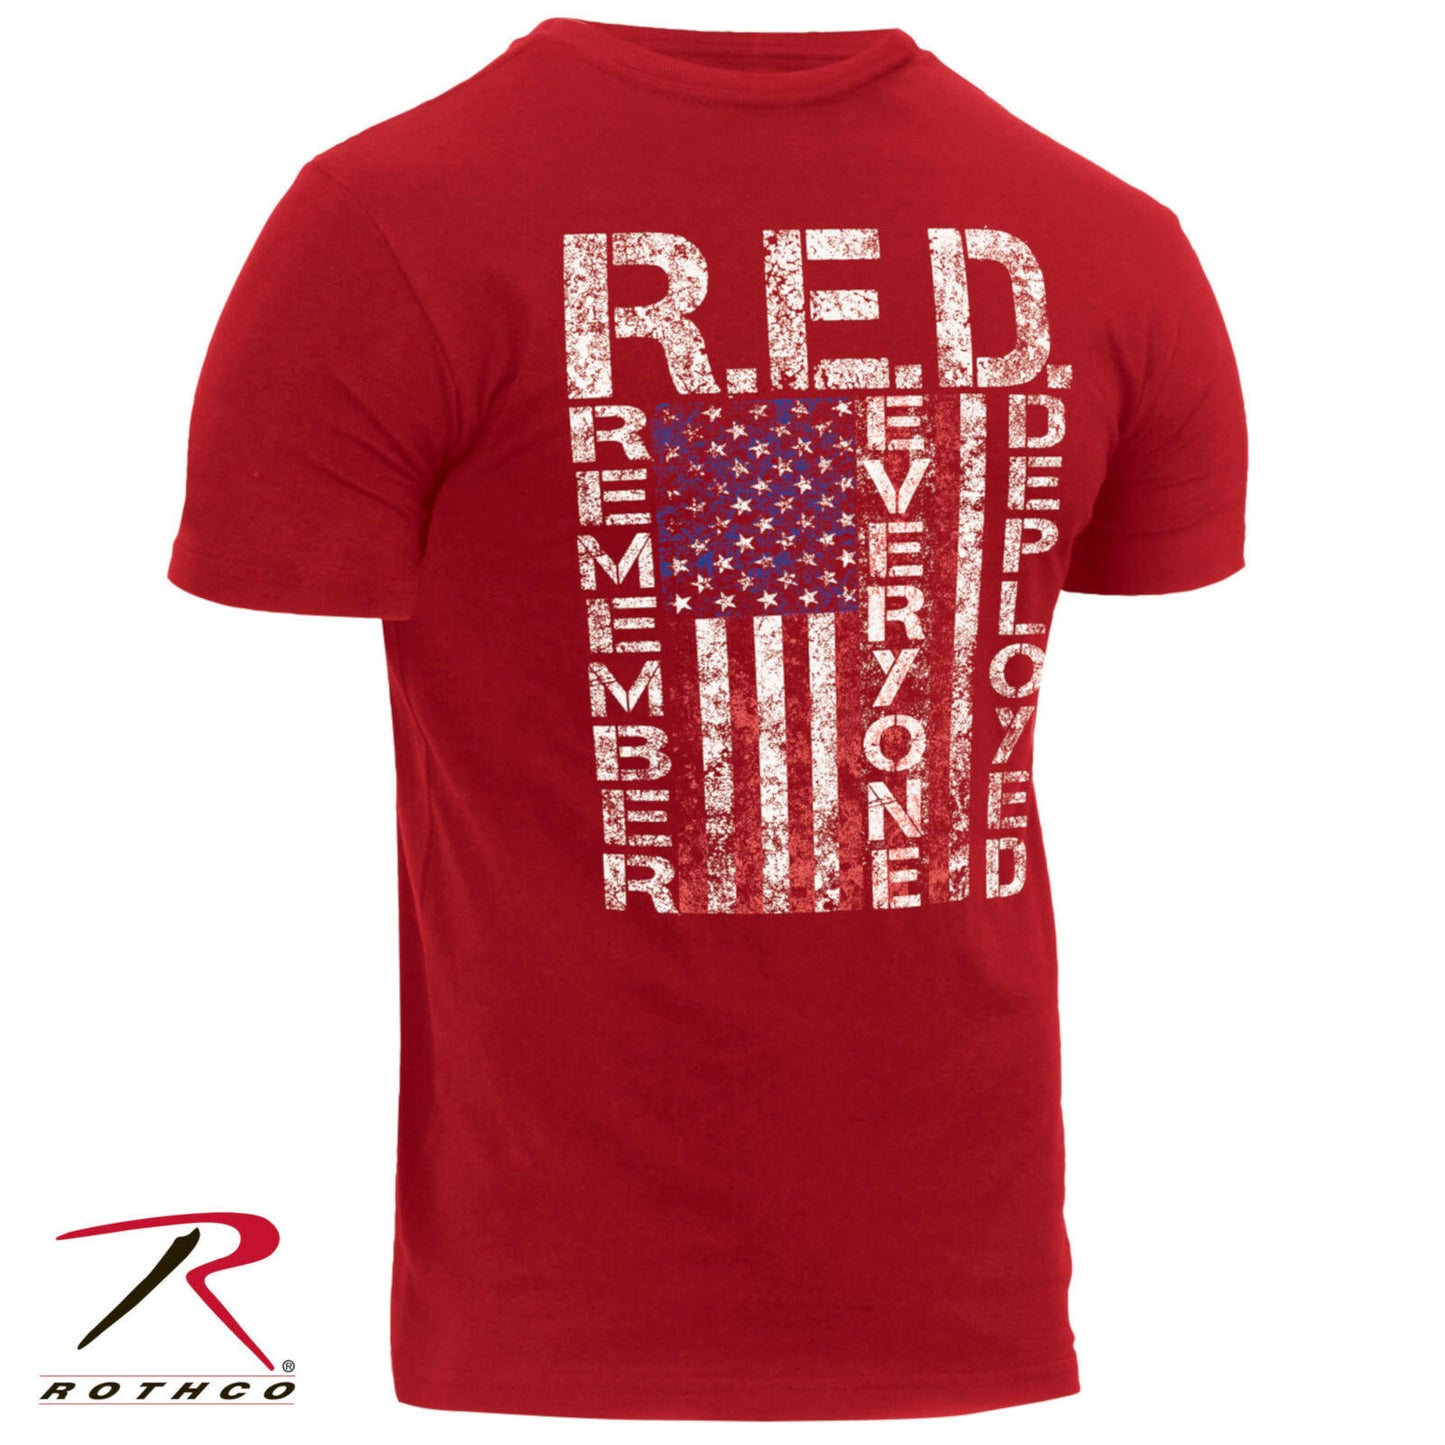 Rothco Men's Athletic Fit T-Shirt - R.E.D. "Remember Everyone Deployed"